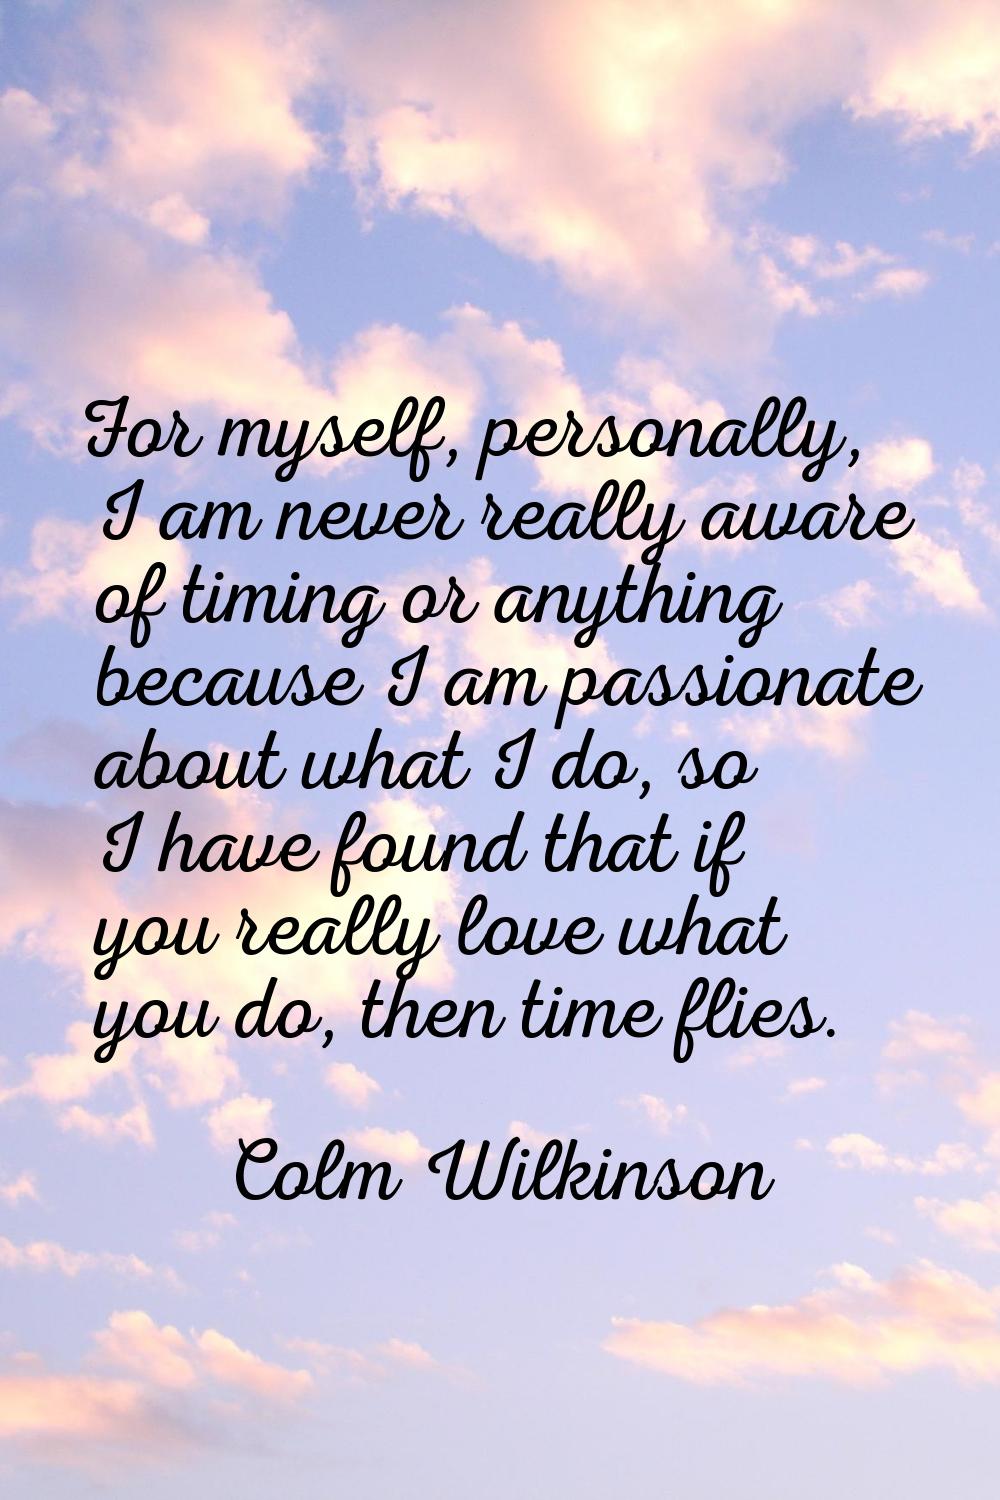 For myself, personally, I am never really aware of timing or anything because I am passionate about